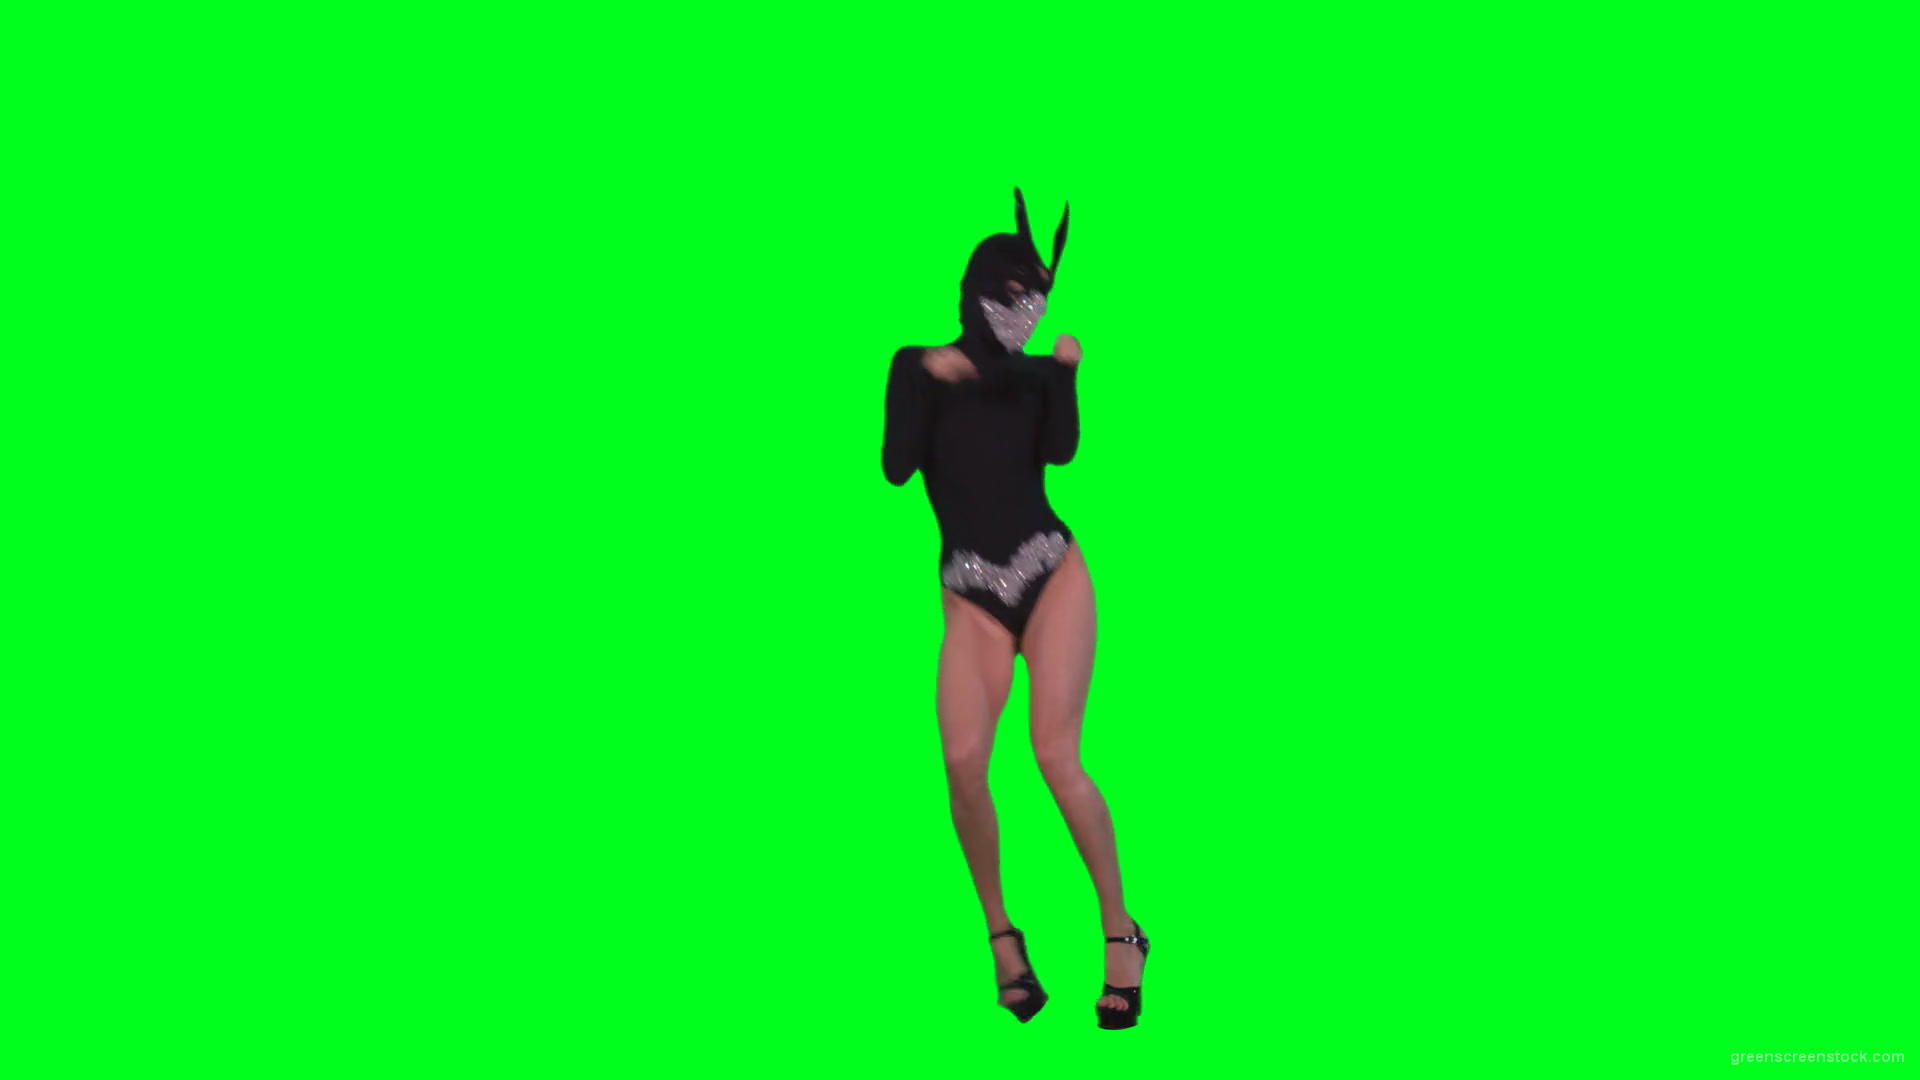 Black-Occult-Banny-Rabbit-dancing-girl-jumping-isolated-on-green-screen-4K-Video-Footage-1920_004 Green Screen Stock